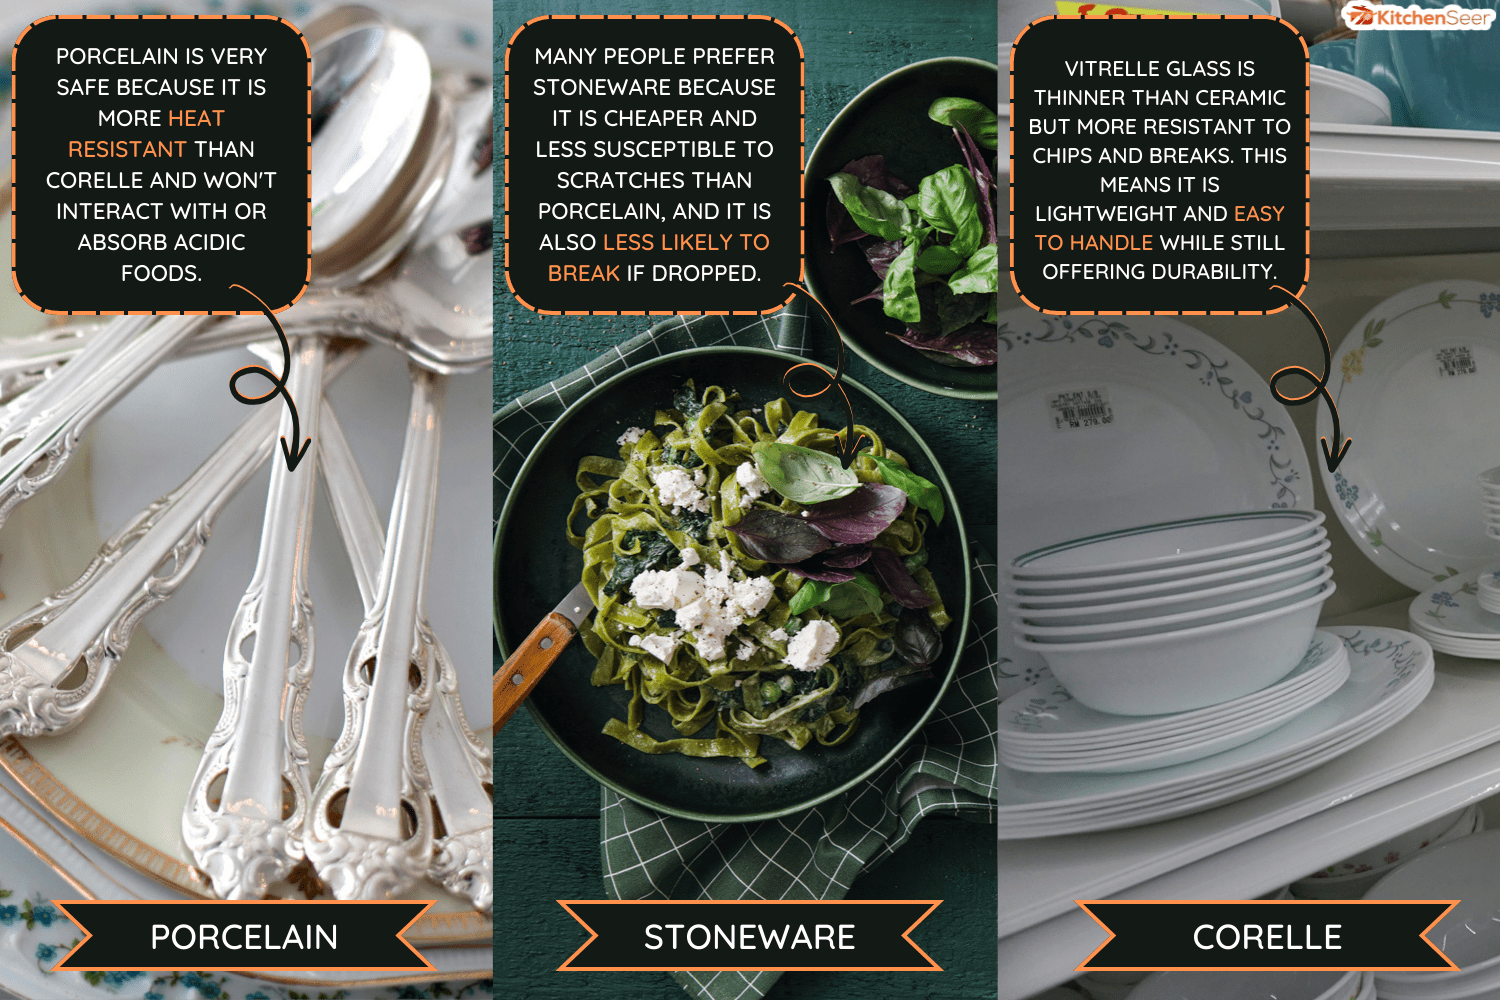 A stack of vintage floral plates with silver teaspoons on a table near lace doilies - Corelle Vs Porcelain Vs Stoneware Differences, Pros, And Cons [Which Is Best For You]